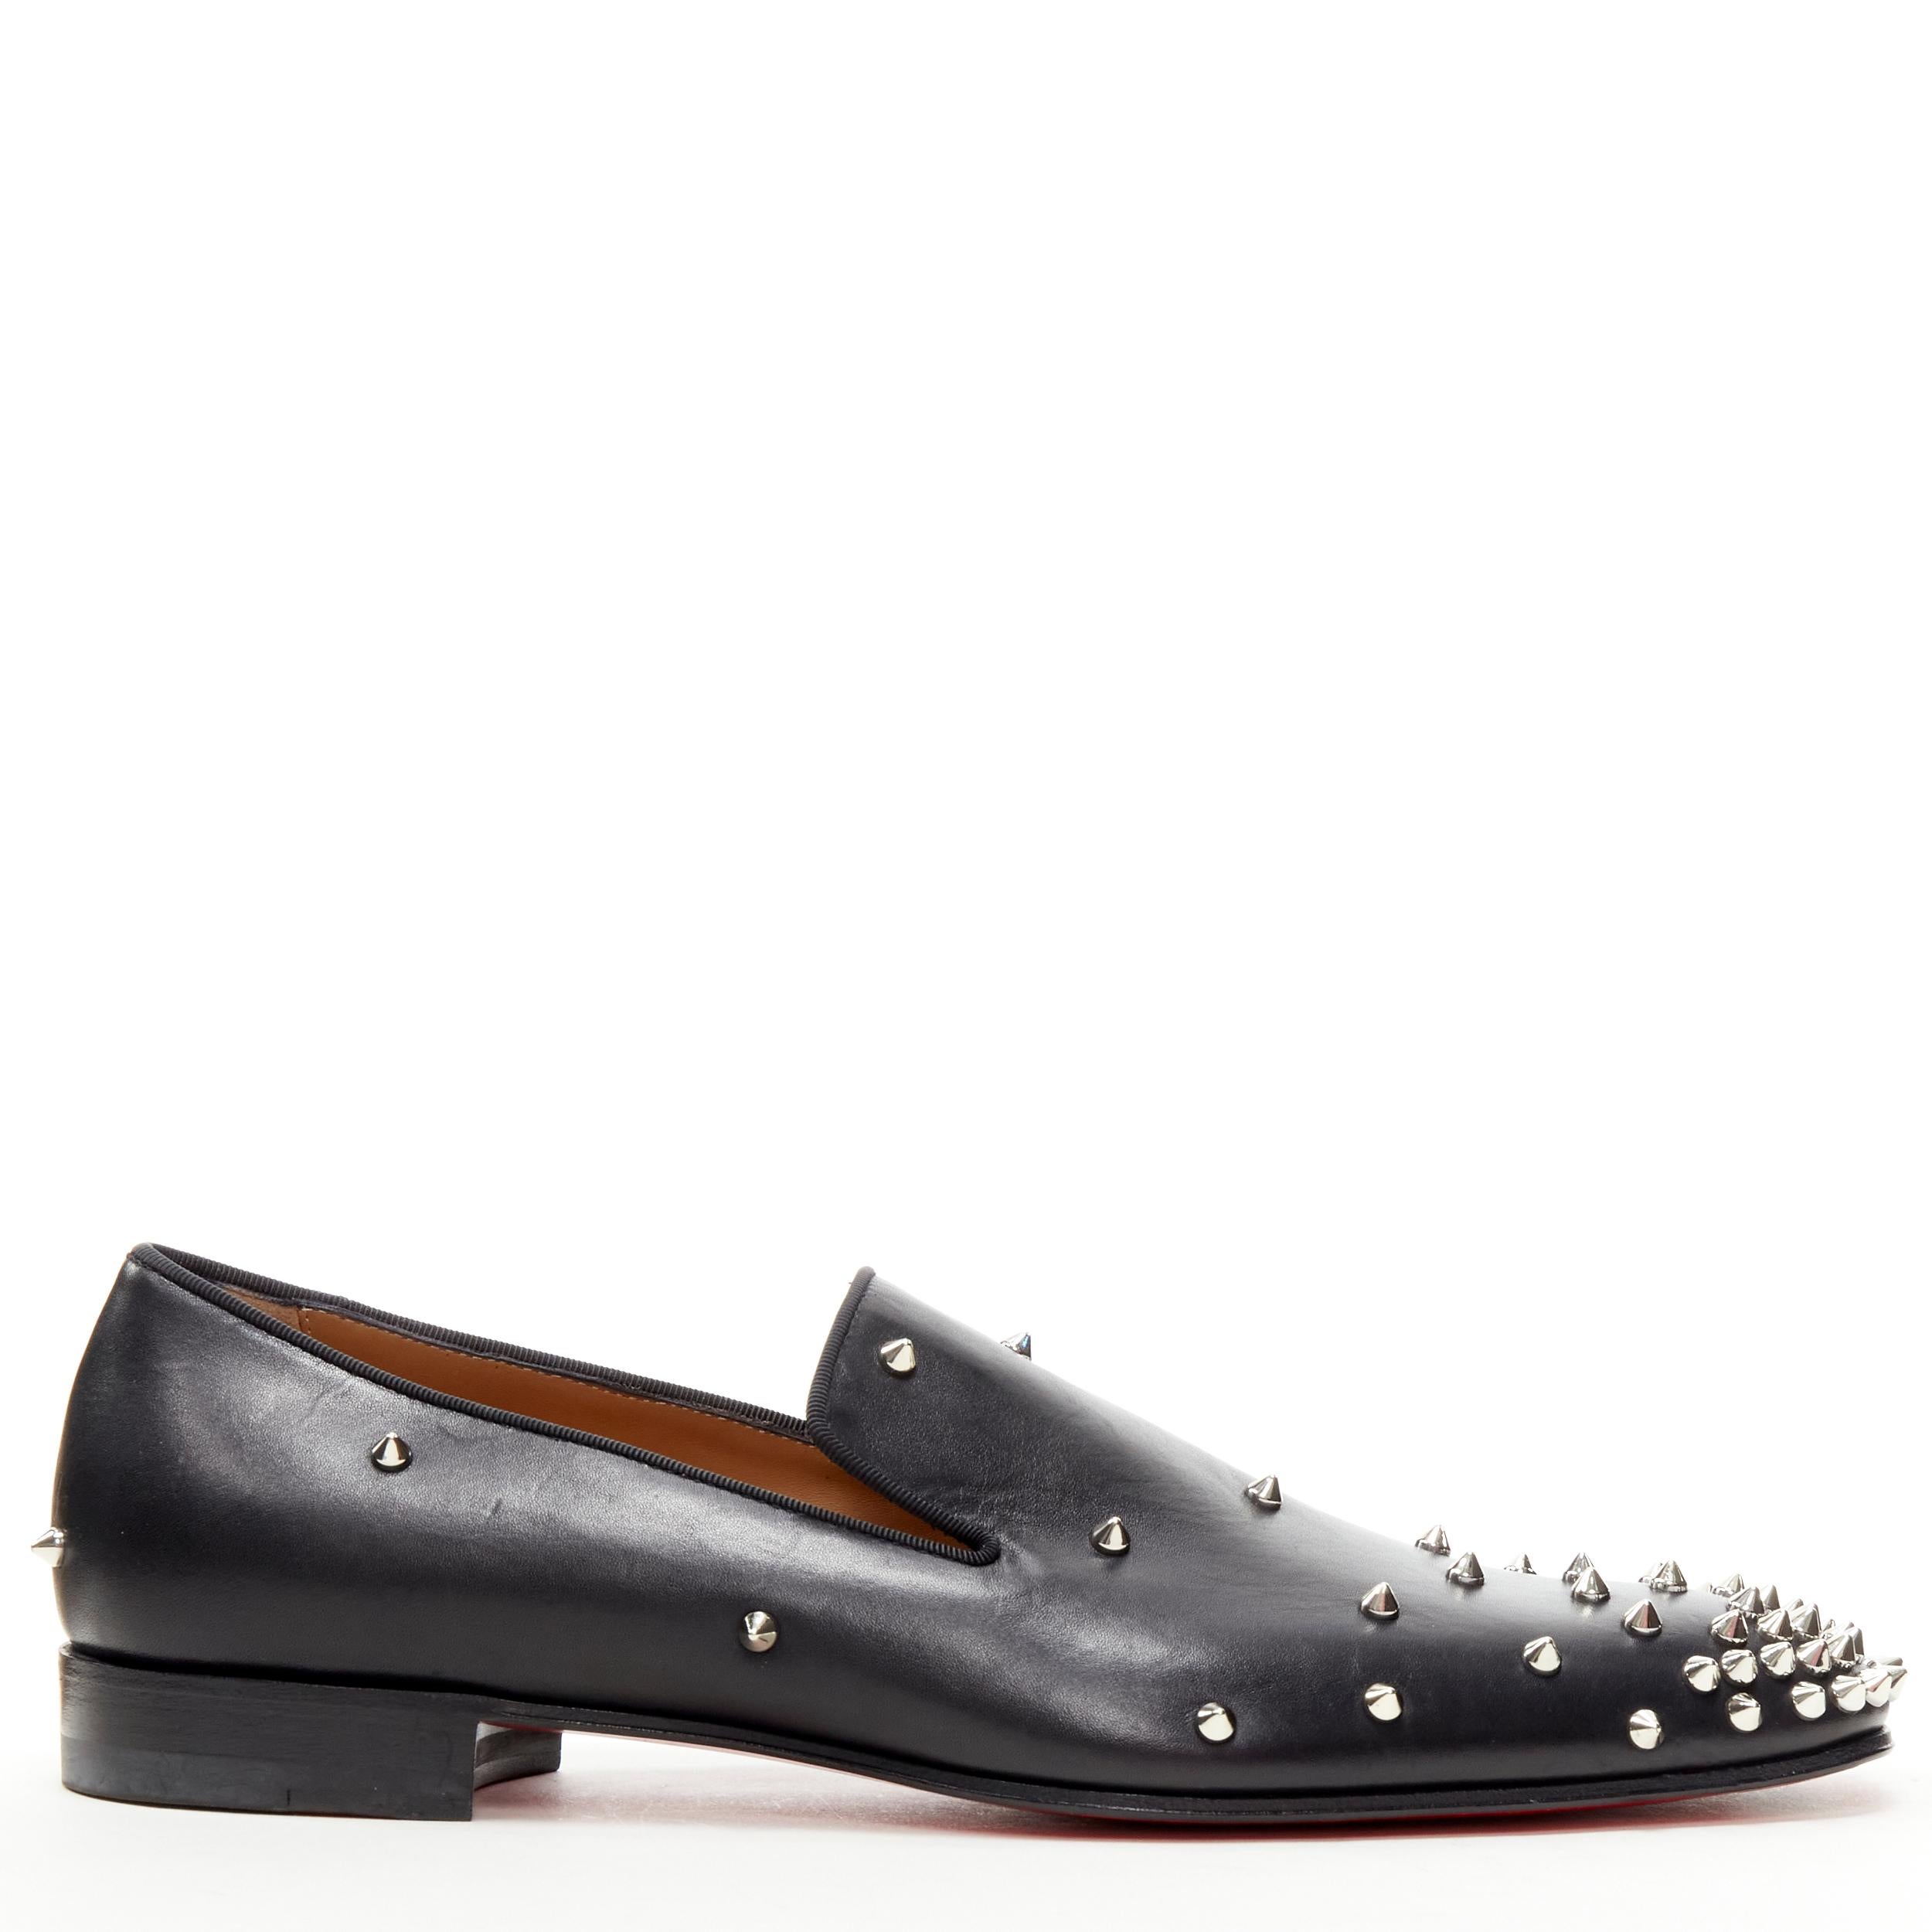 CHRISTIAN LOUBOUTIN Degra Flat black calf leather silver spike loafer EU42 
Reference: TGAS/C01138 
Brand: Christian Louboutin 
Designer: Christian Louboutin 
Model: Degra Flat 
Material: Leather 
Color: Black 
Pattern: Solid 
Extra Detail: